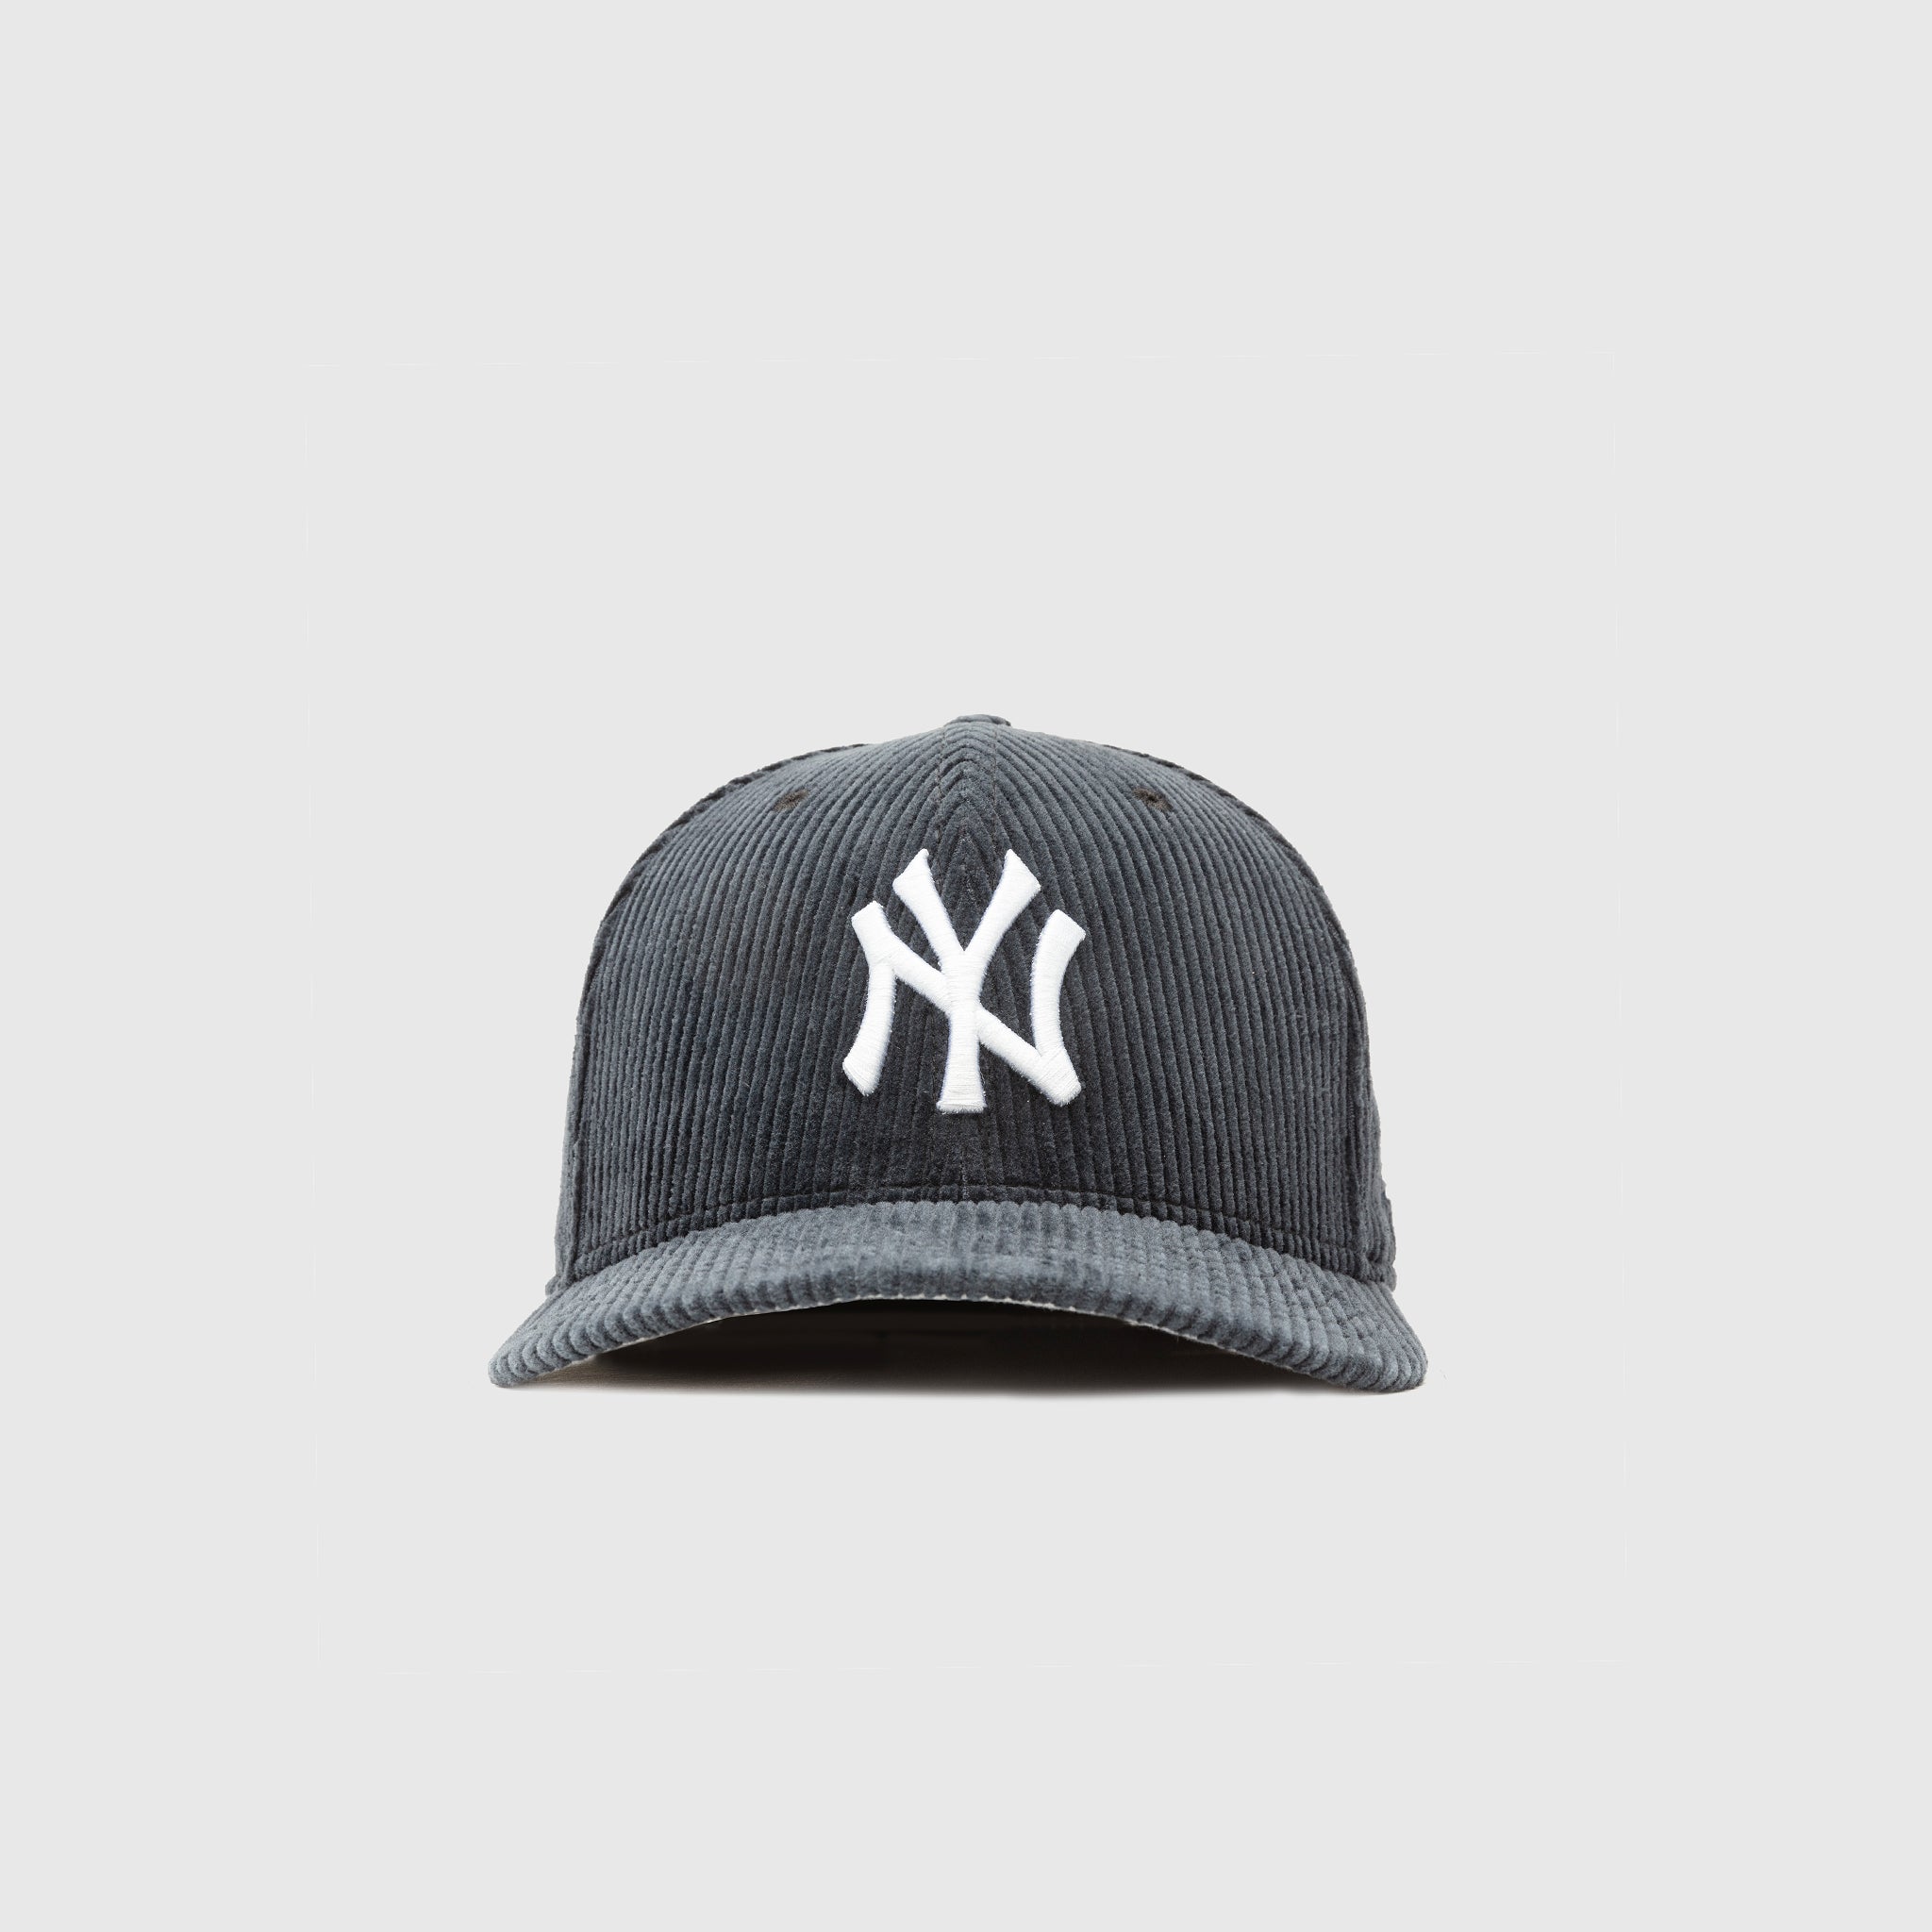 AnthonyantonellisShops X NEW ERA NEW YORK YANKEES 59FIFTY FITTED "CORD"